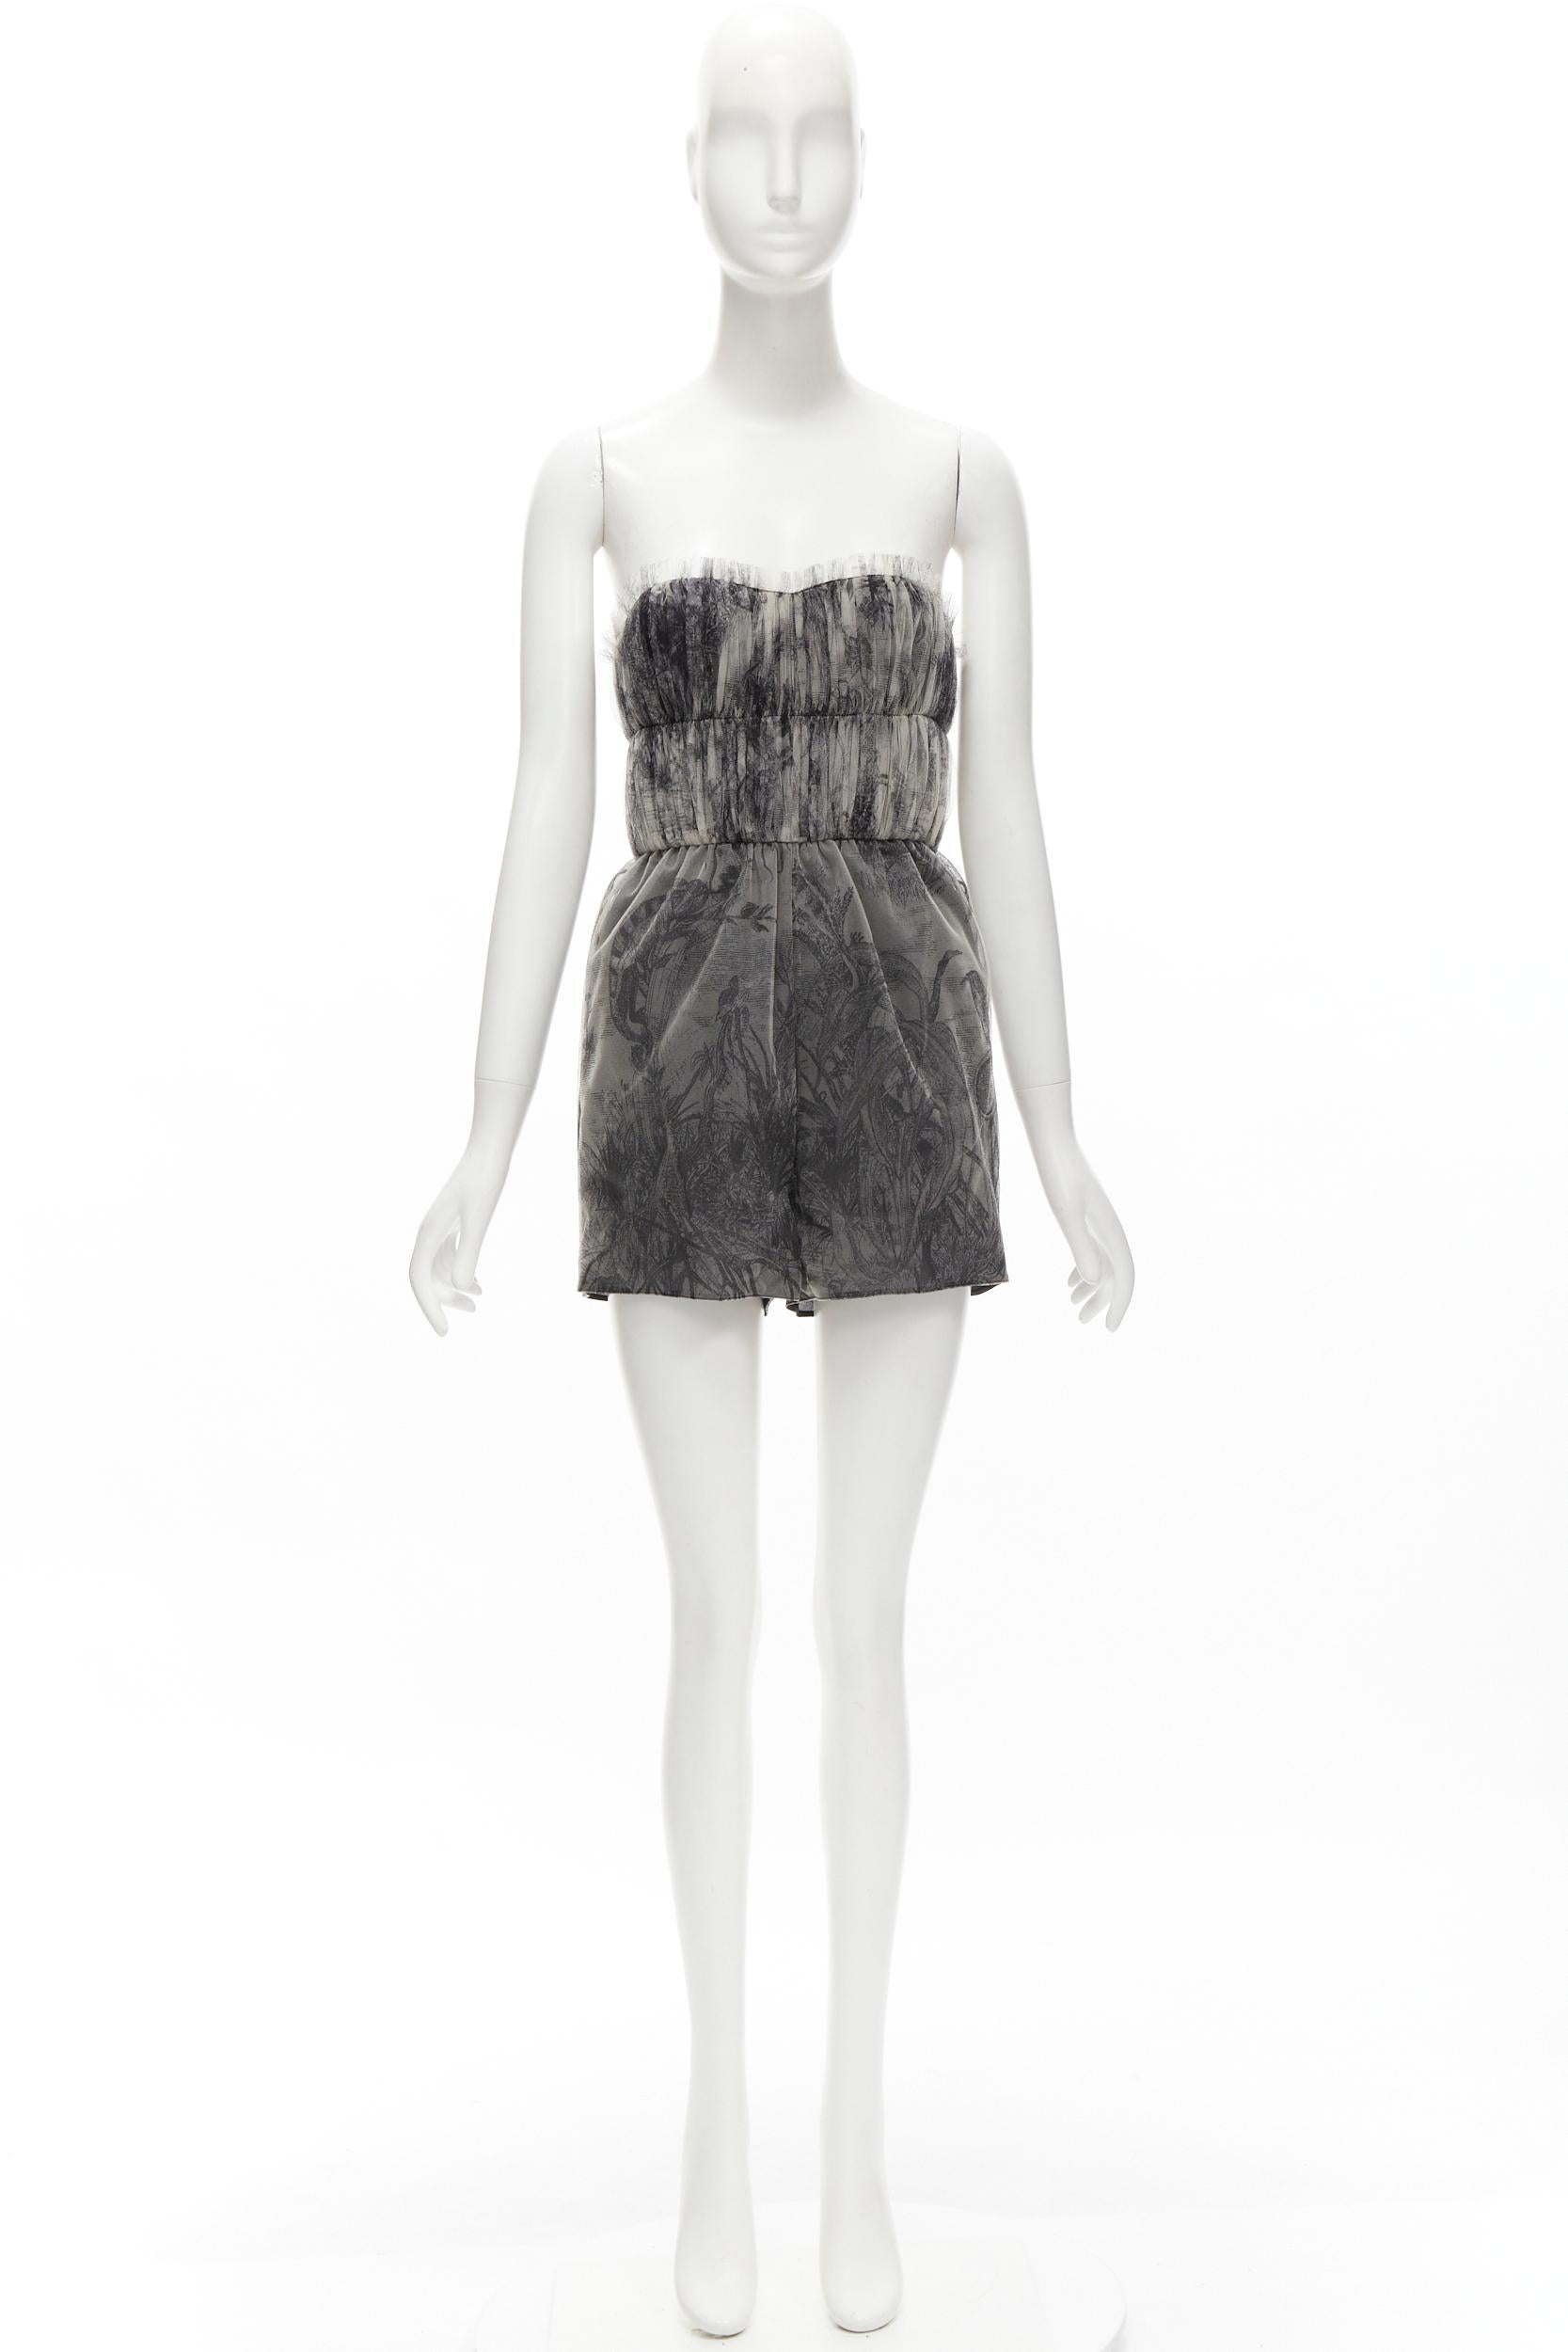 new CHRISTIAN DIOR Fantaisie Dioriviera tulle gathered pleated romper FR34 XS For Sale 2